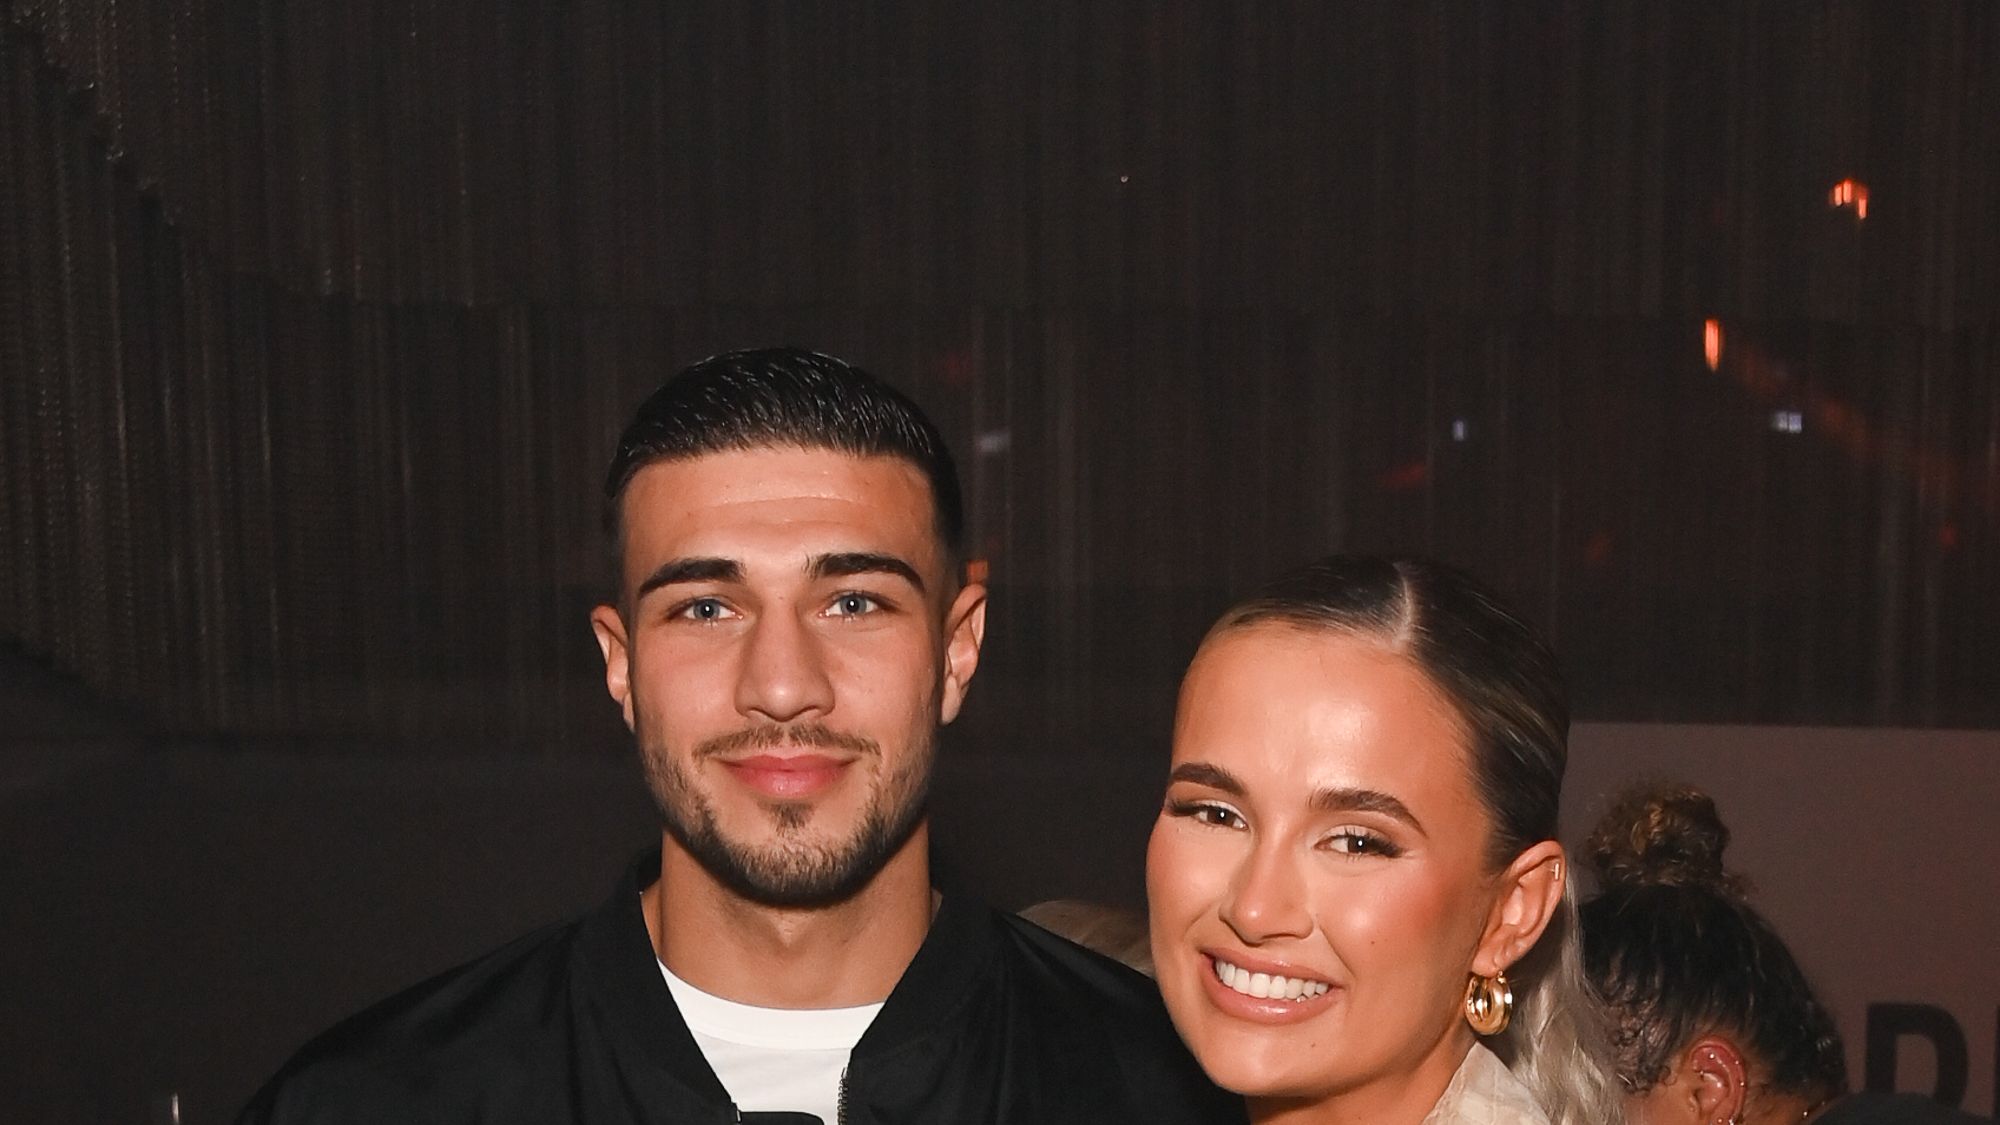 Love Island's Molly-Mae Hague and Tommy Fury put on a loved-up